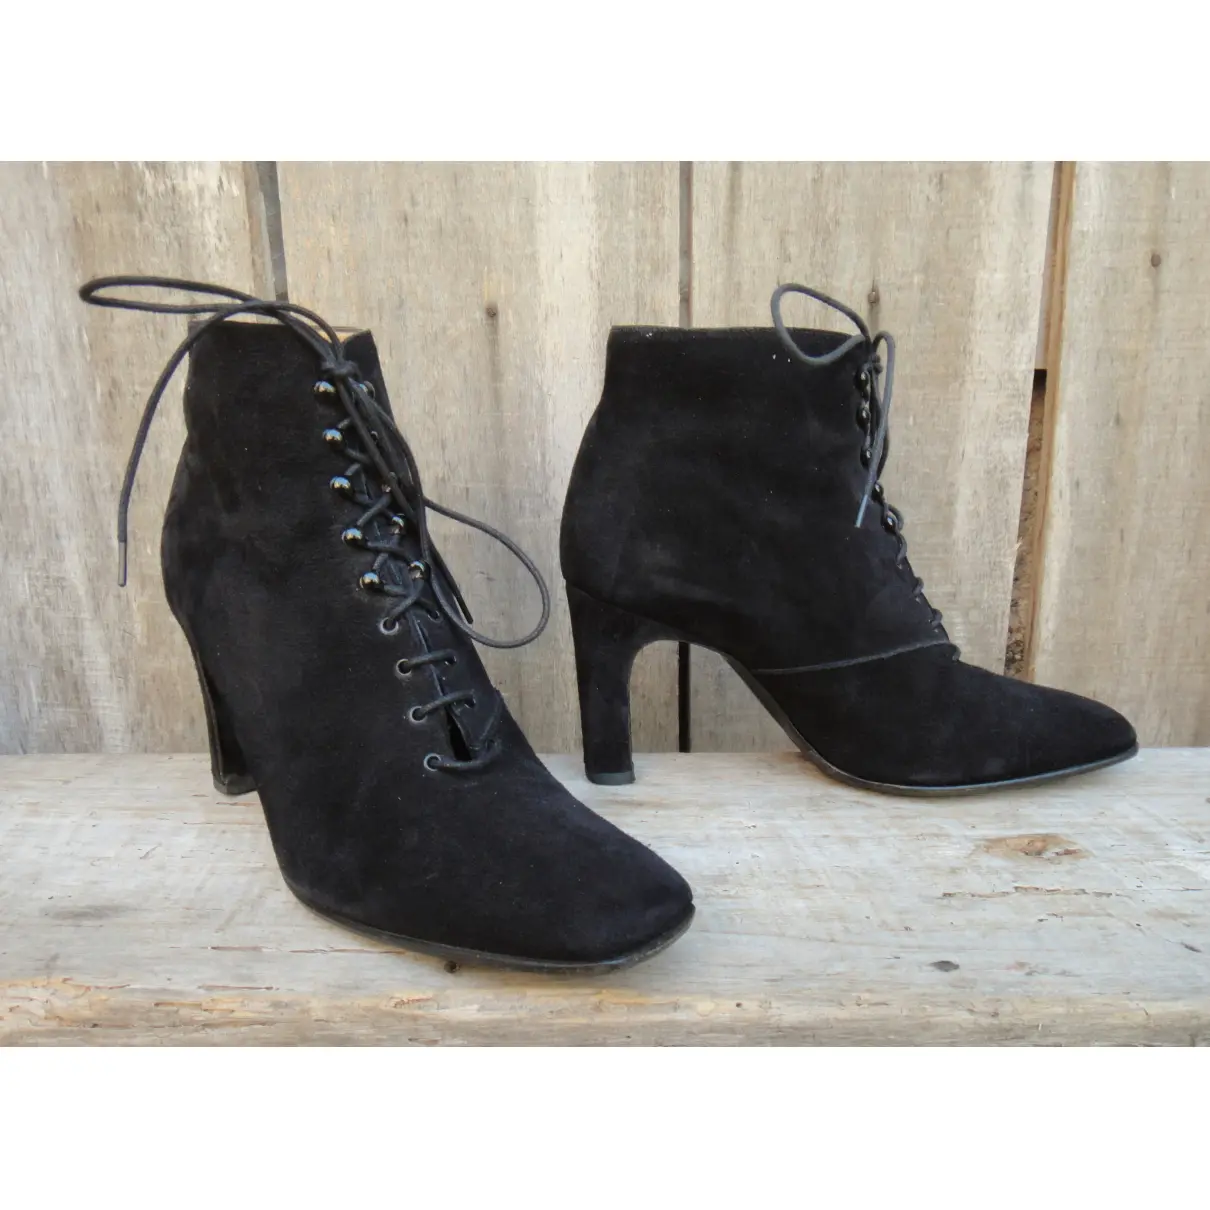 Buy Free Lance Lace up boots online - Vintage